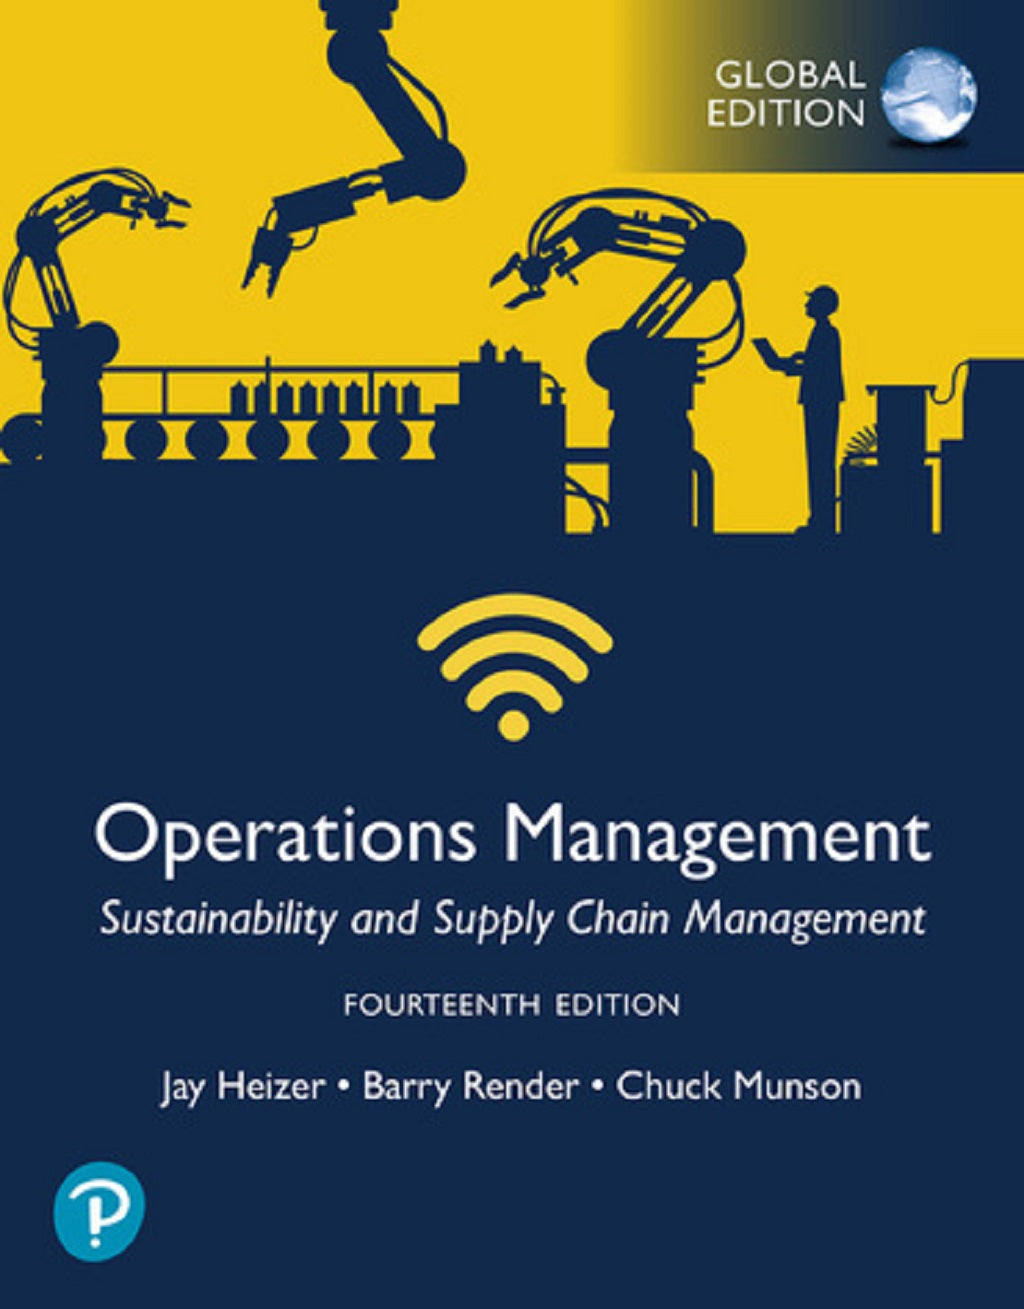 MyLab Operations Management for Heizer, Operations Management: Sustainability and Supply Chain Management, 14th Global Edition